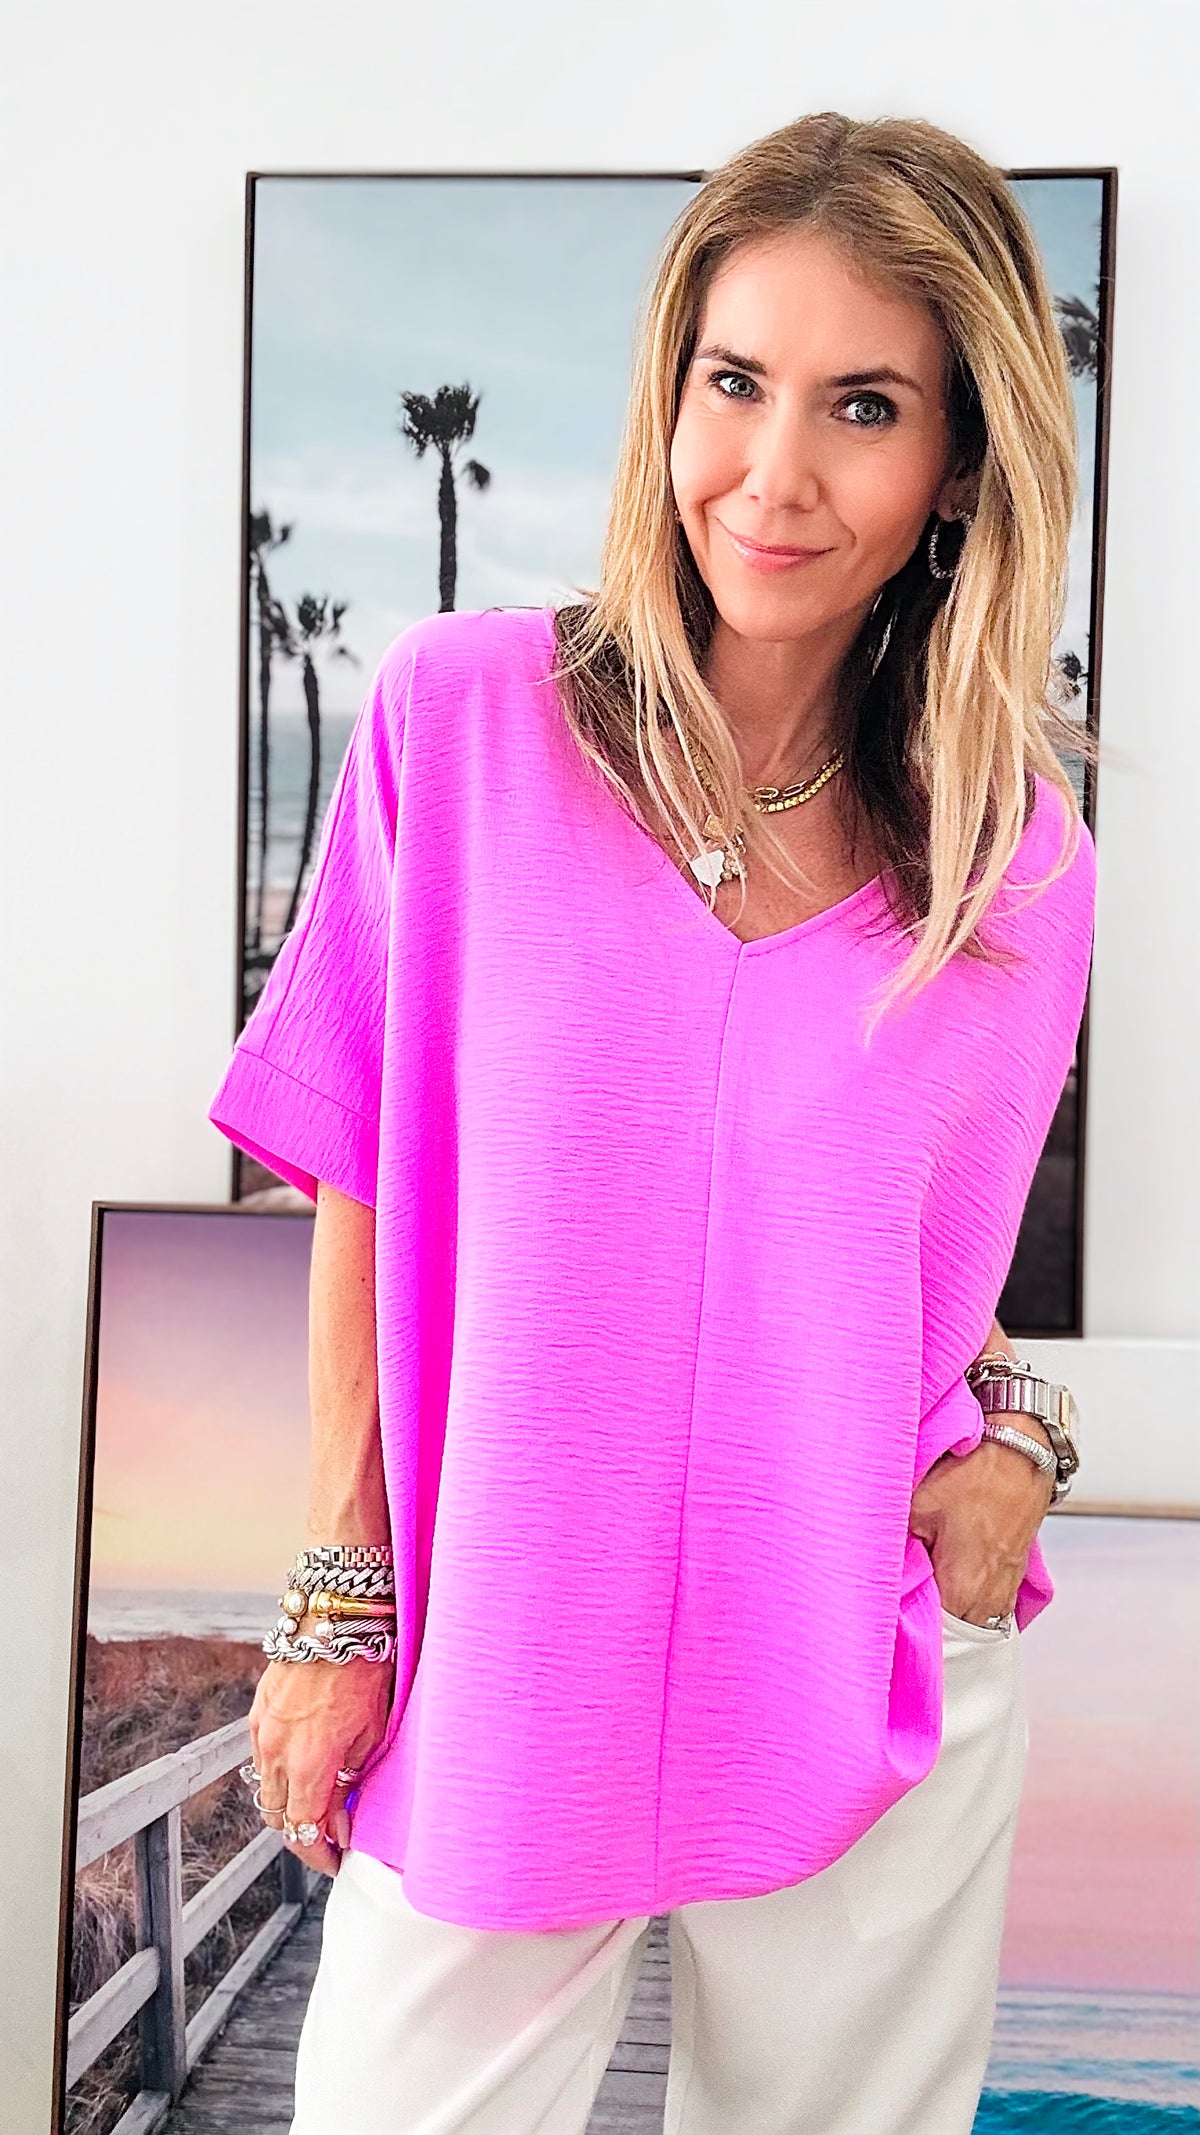 V-Neck Dolman Sleeve Top - Bright Mauve-110 Short Sleeve Tops-Zenana-Coastal Bloom Boutique, find the trendiest versions of the popular styles and looks Located in Indialantic, FL